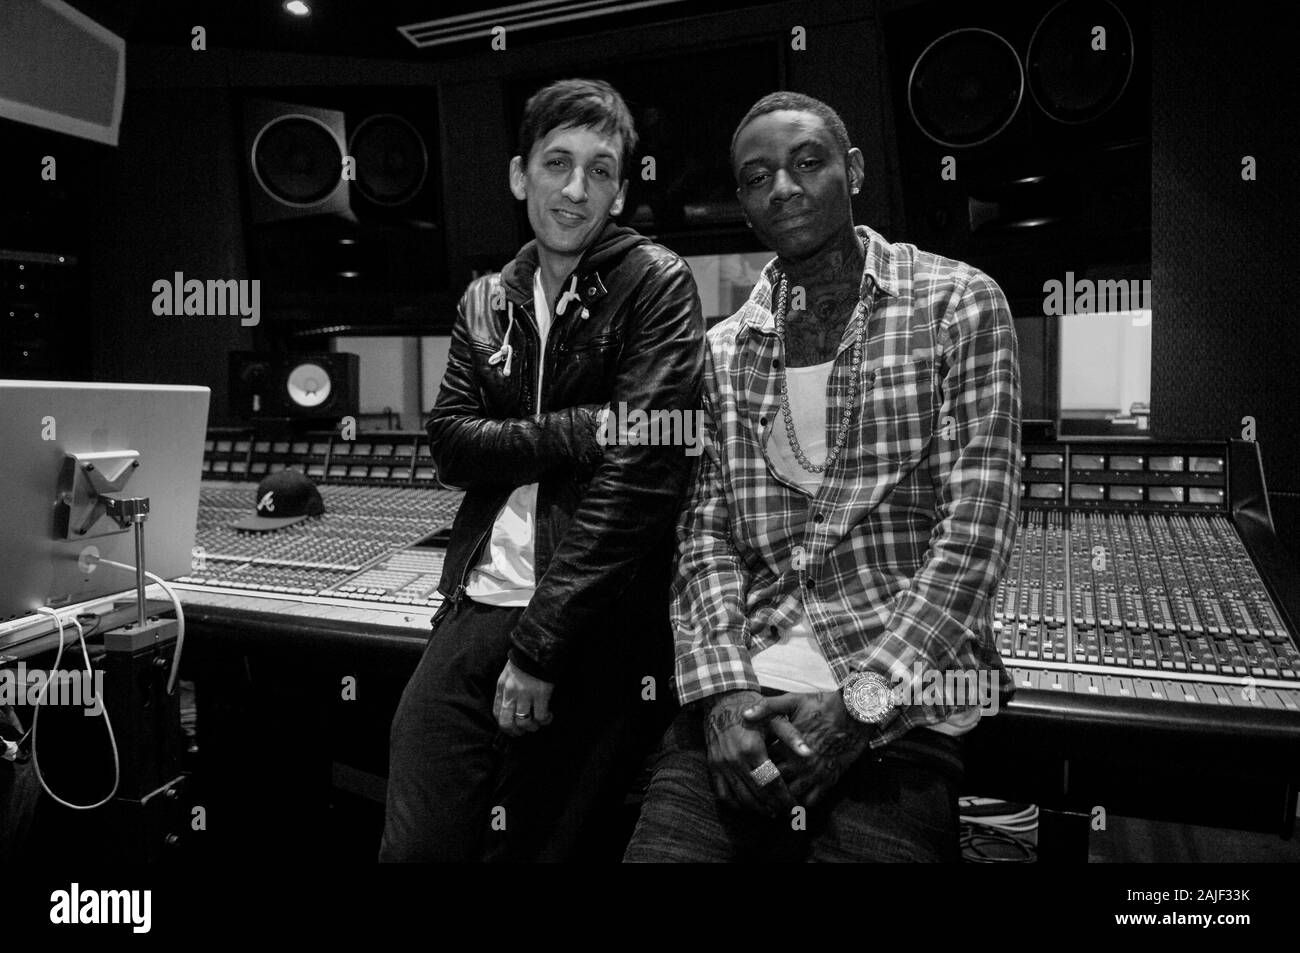 (L-R) Clinton Sparks and Rapper Deandre Way aka Soulja Boy at a recording studio on February 5, 2010 in Los Angeles, California. Stock Photo